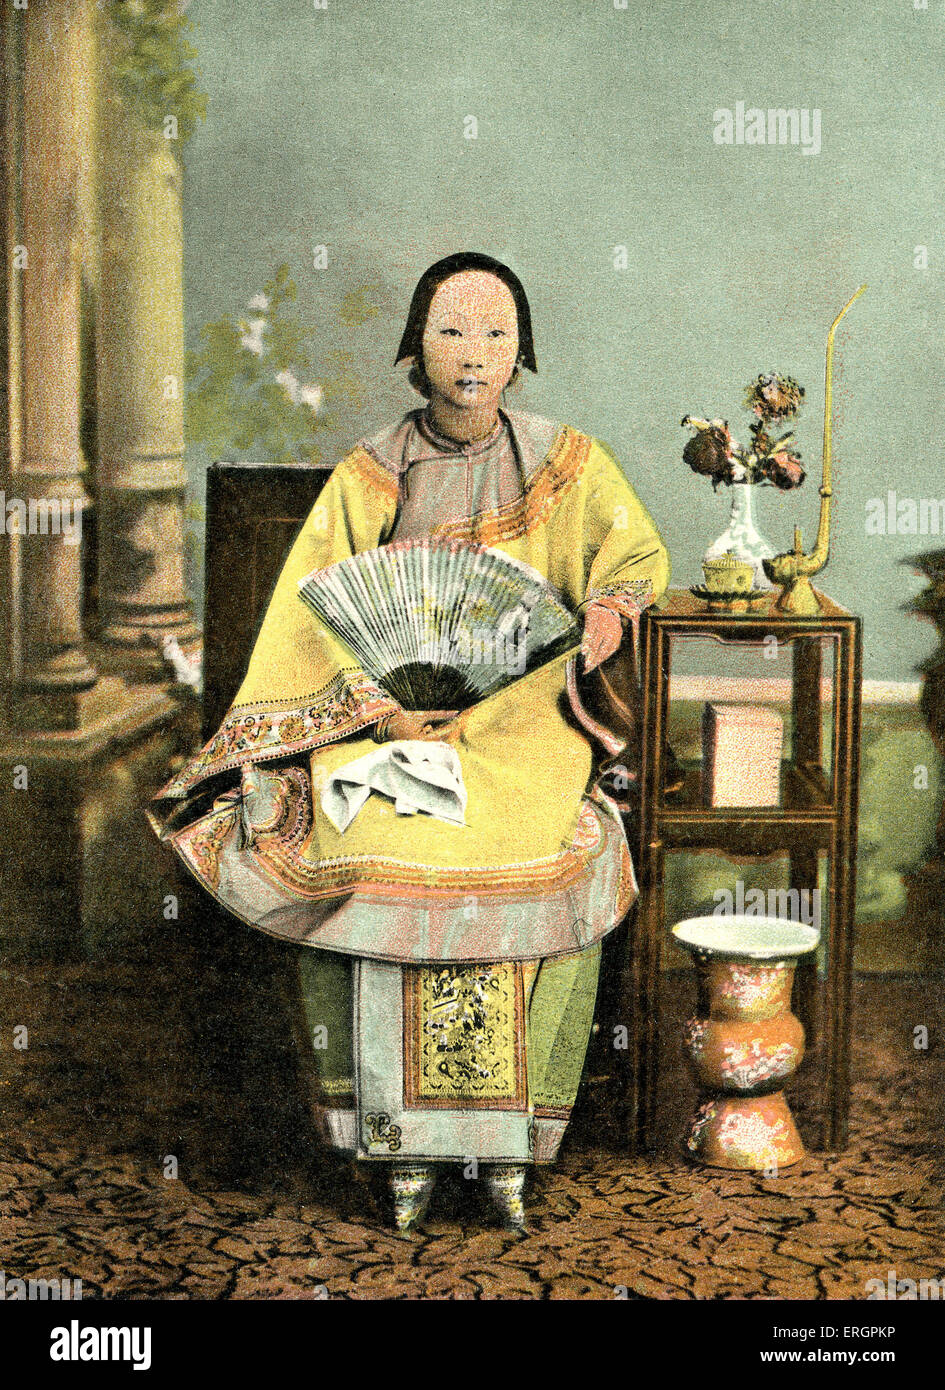 Chinese lady with bound feet. Early 20th century. China, Hong Kong under British administration. Stock Photo